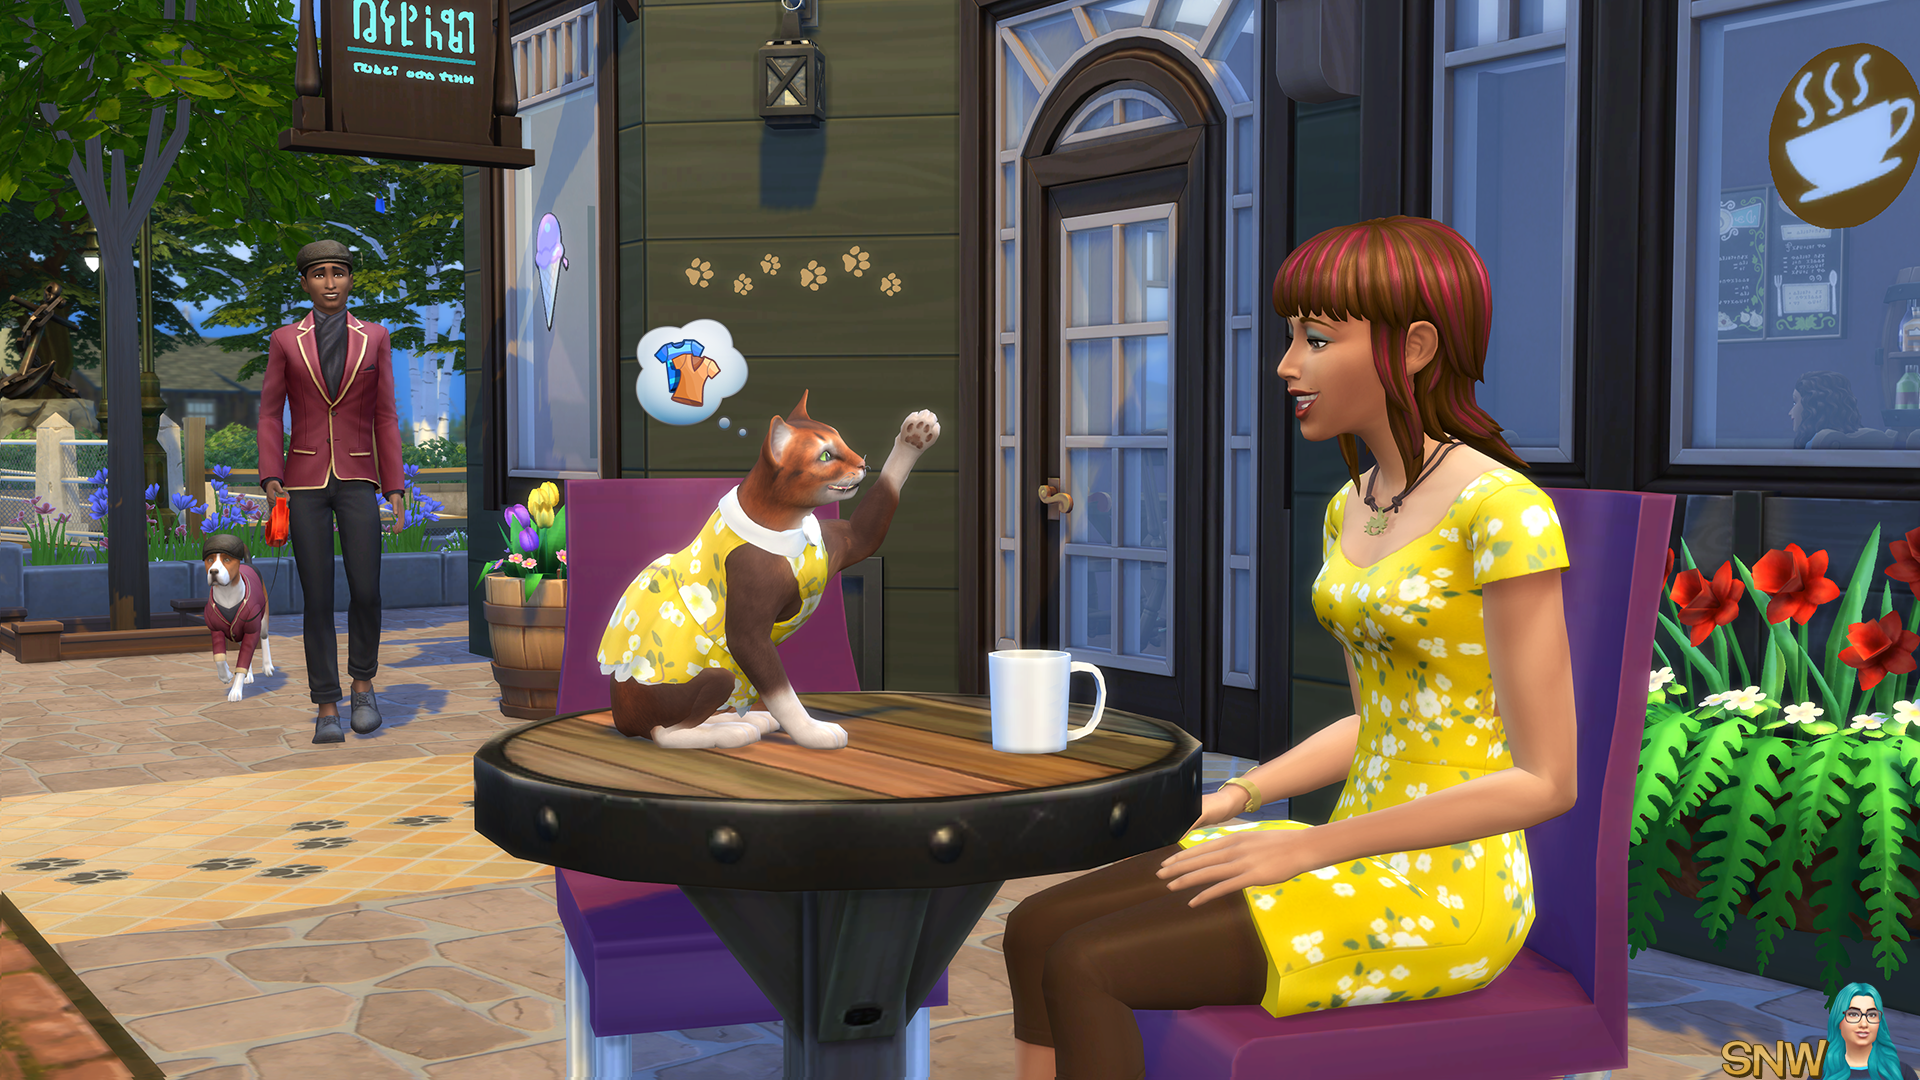 The Sims™ 4 Cats and Dogs Plus My First Pet Stuff Bundle